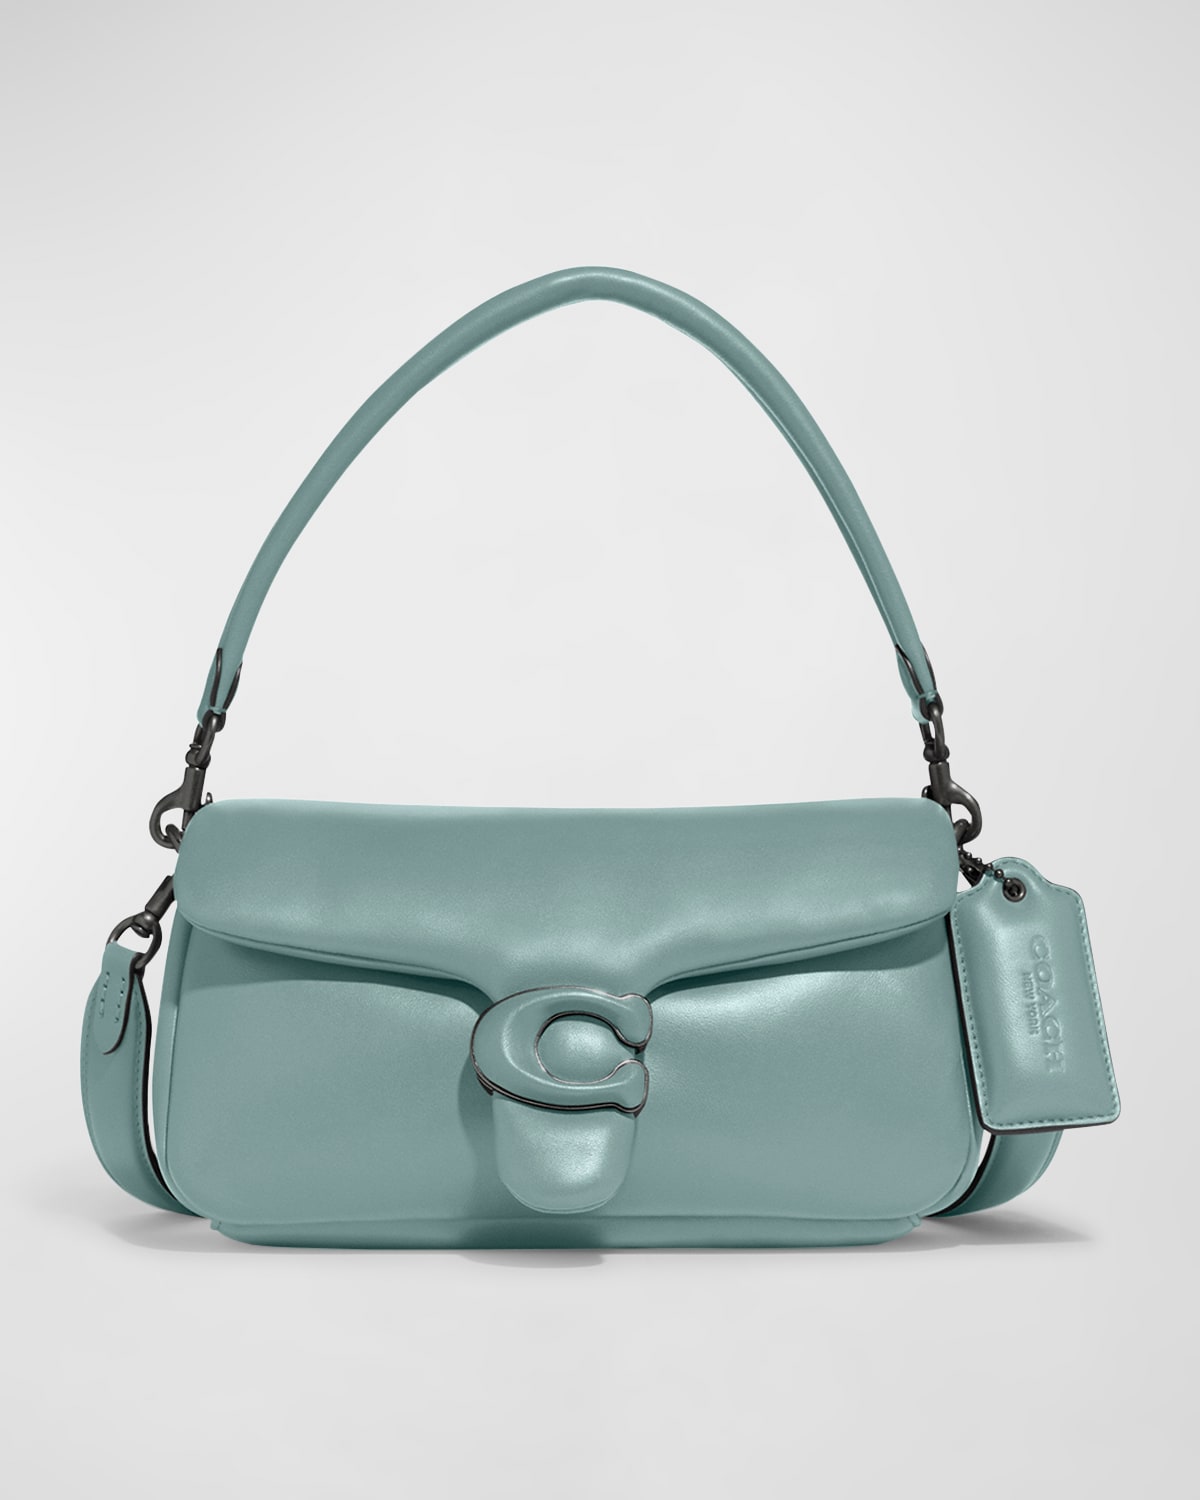 Coach Pillow Tabby 26 Leather Shoulder Bag In Aqua